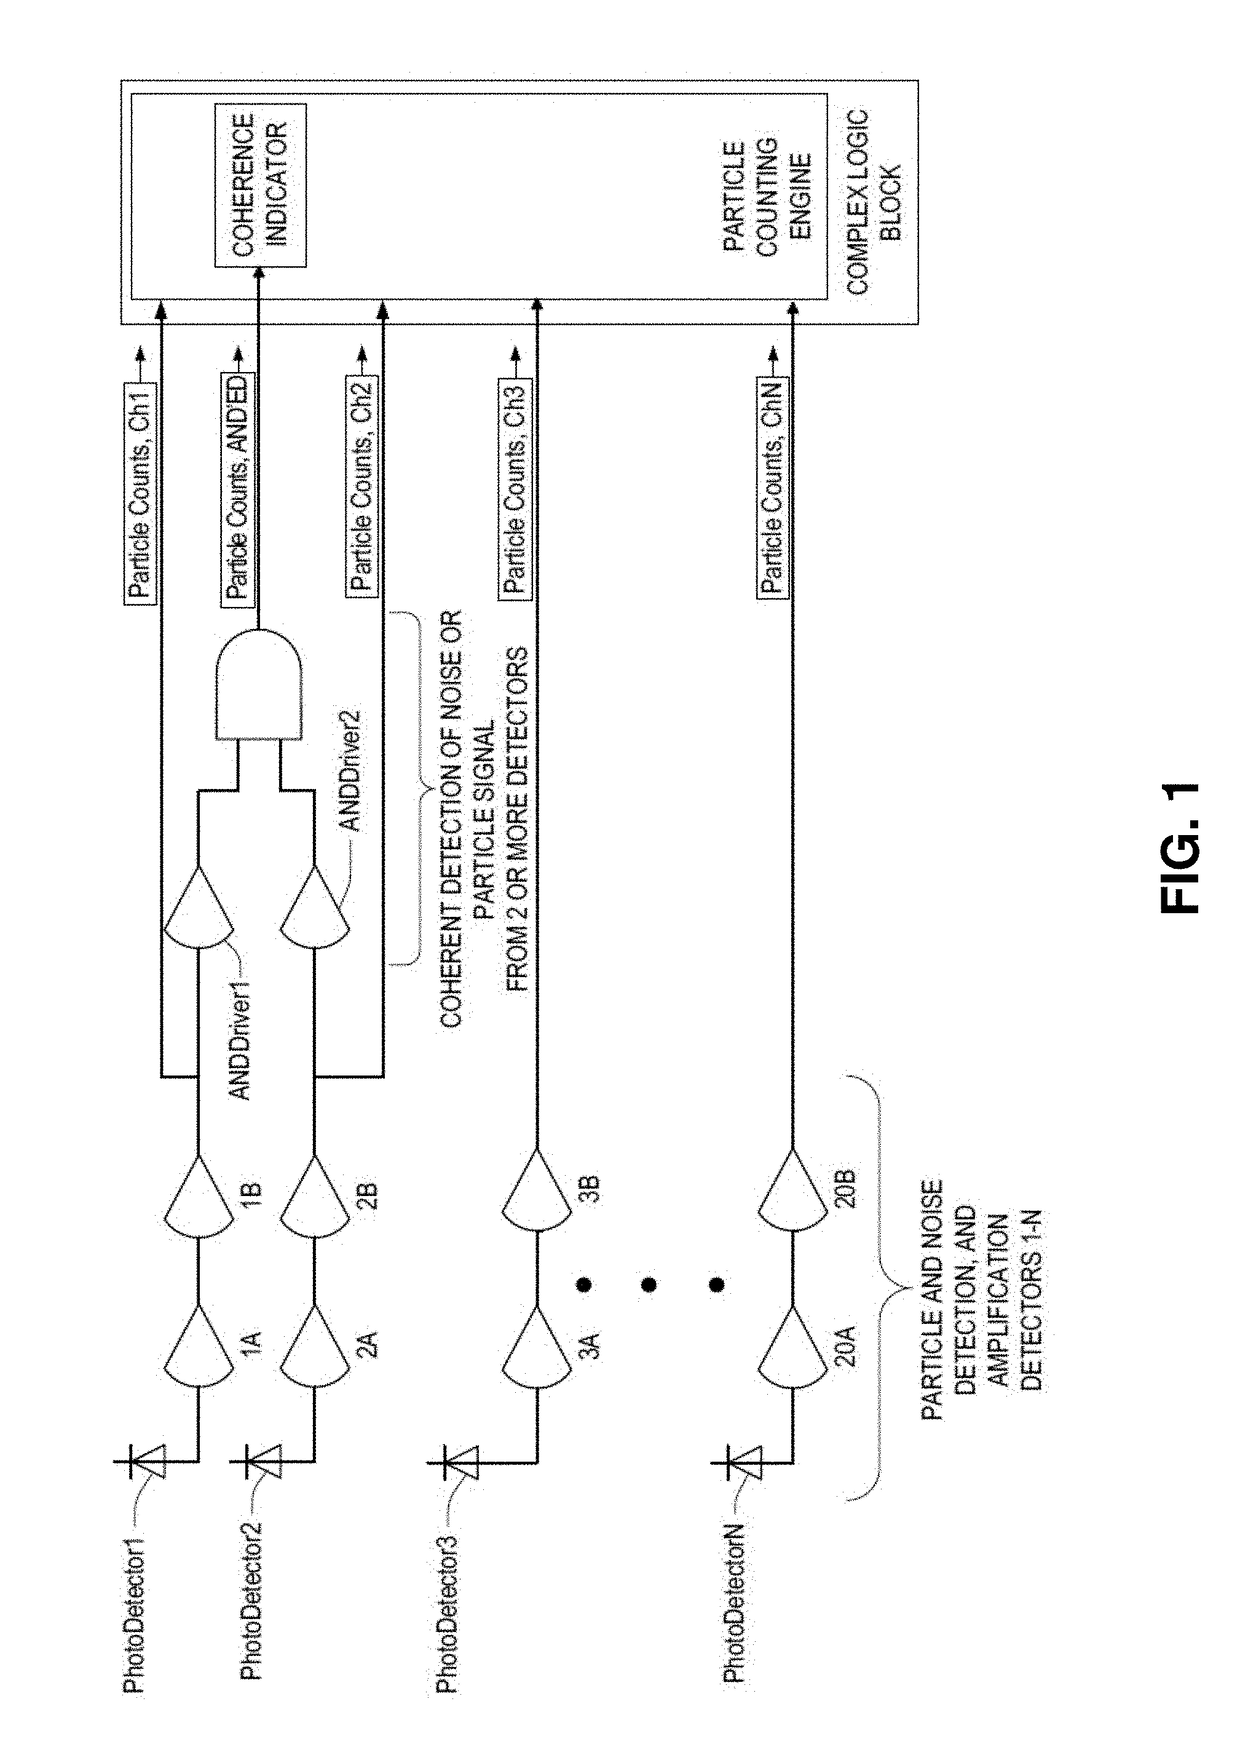 Laser noise detection and mitigation in particle counting instruments